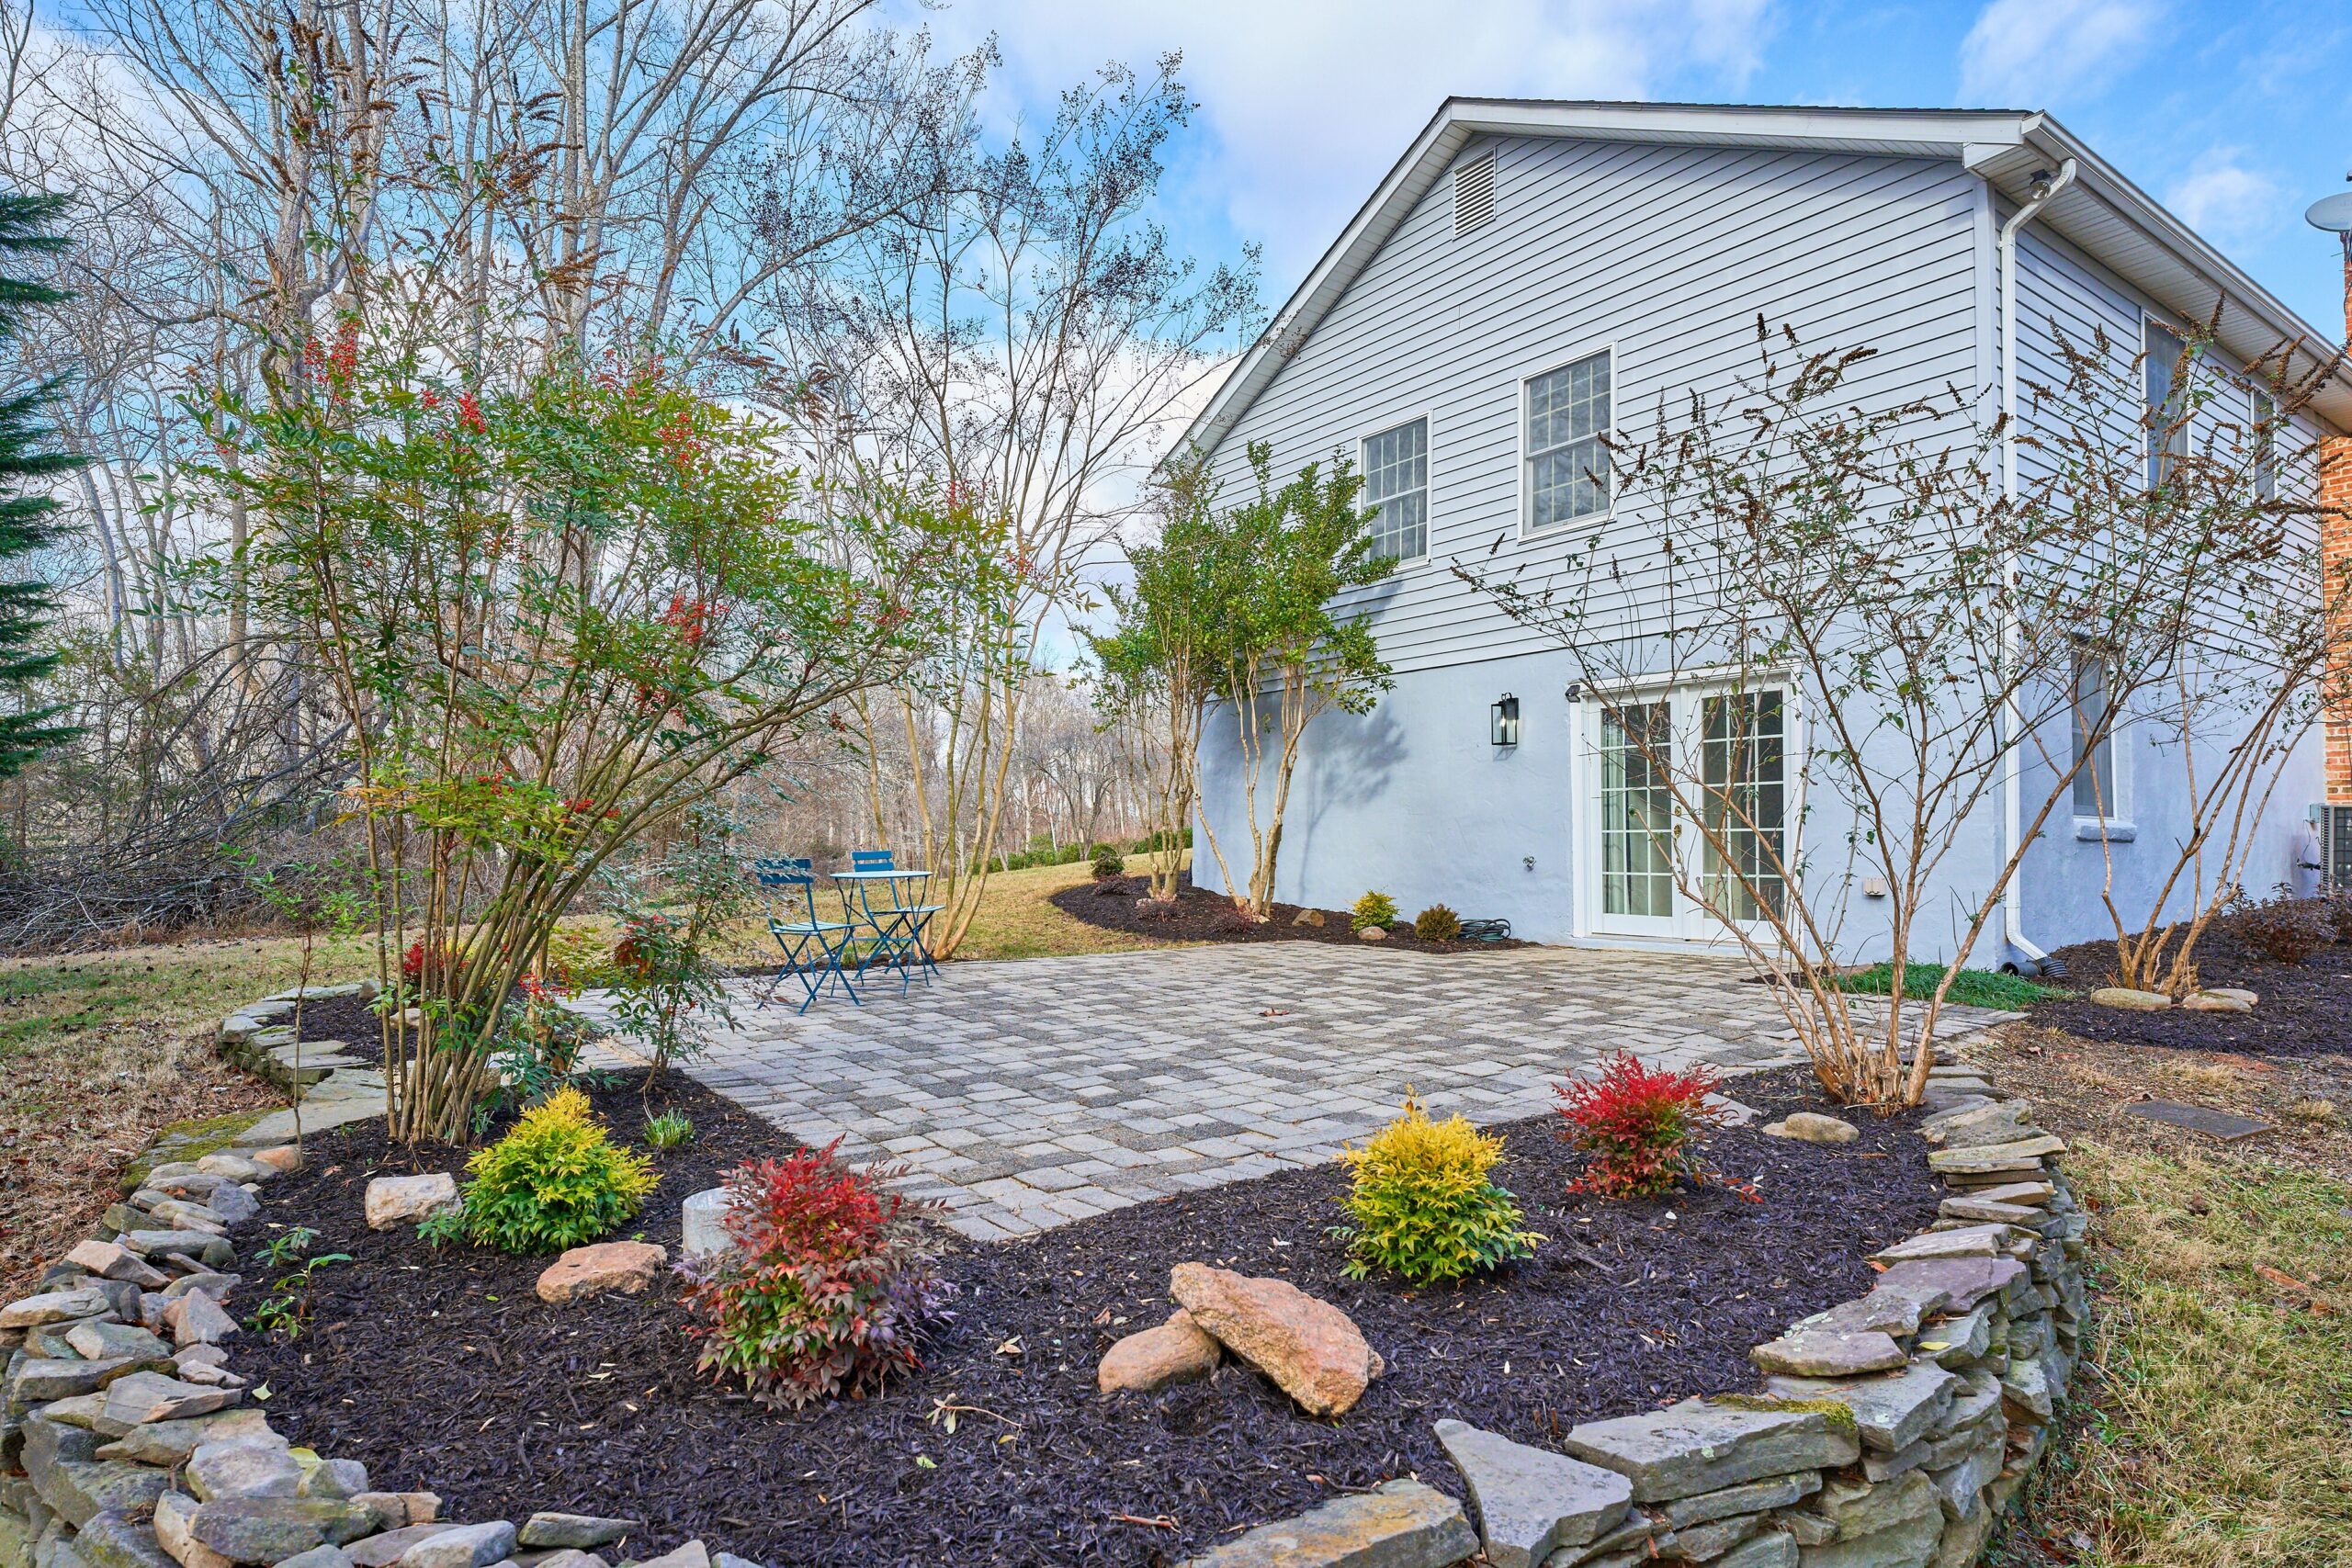 Professional exterior photo of 3103 Indian Run Rd - showing the stone patio and landscaping just off the lower level of the grey rambler